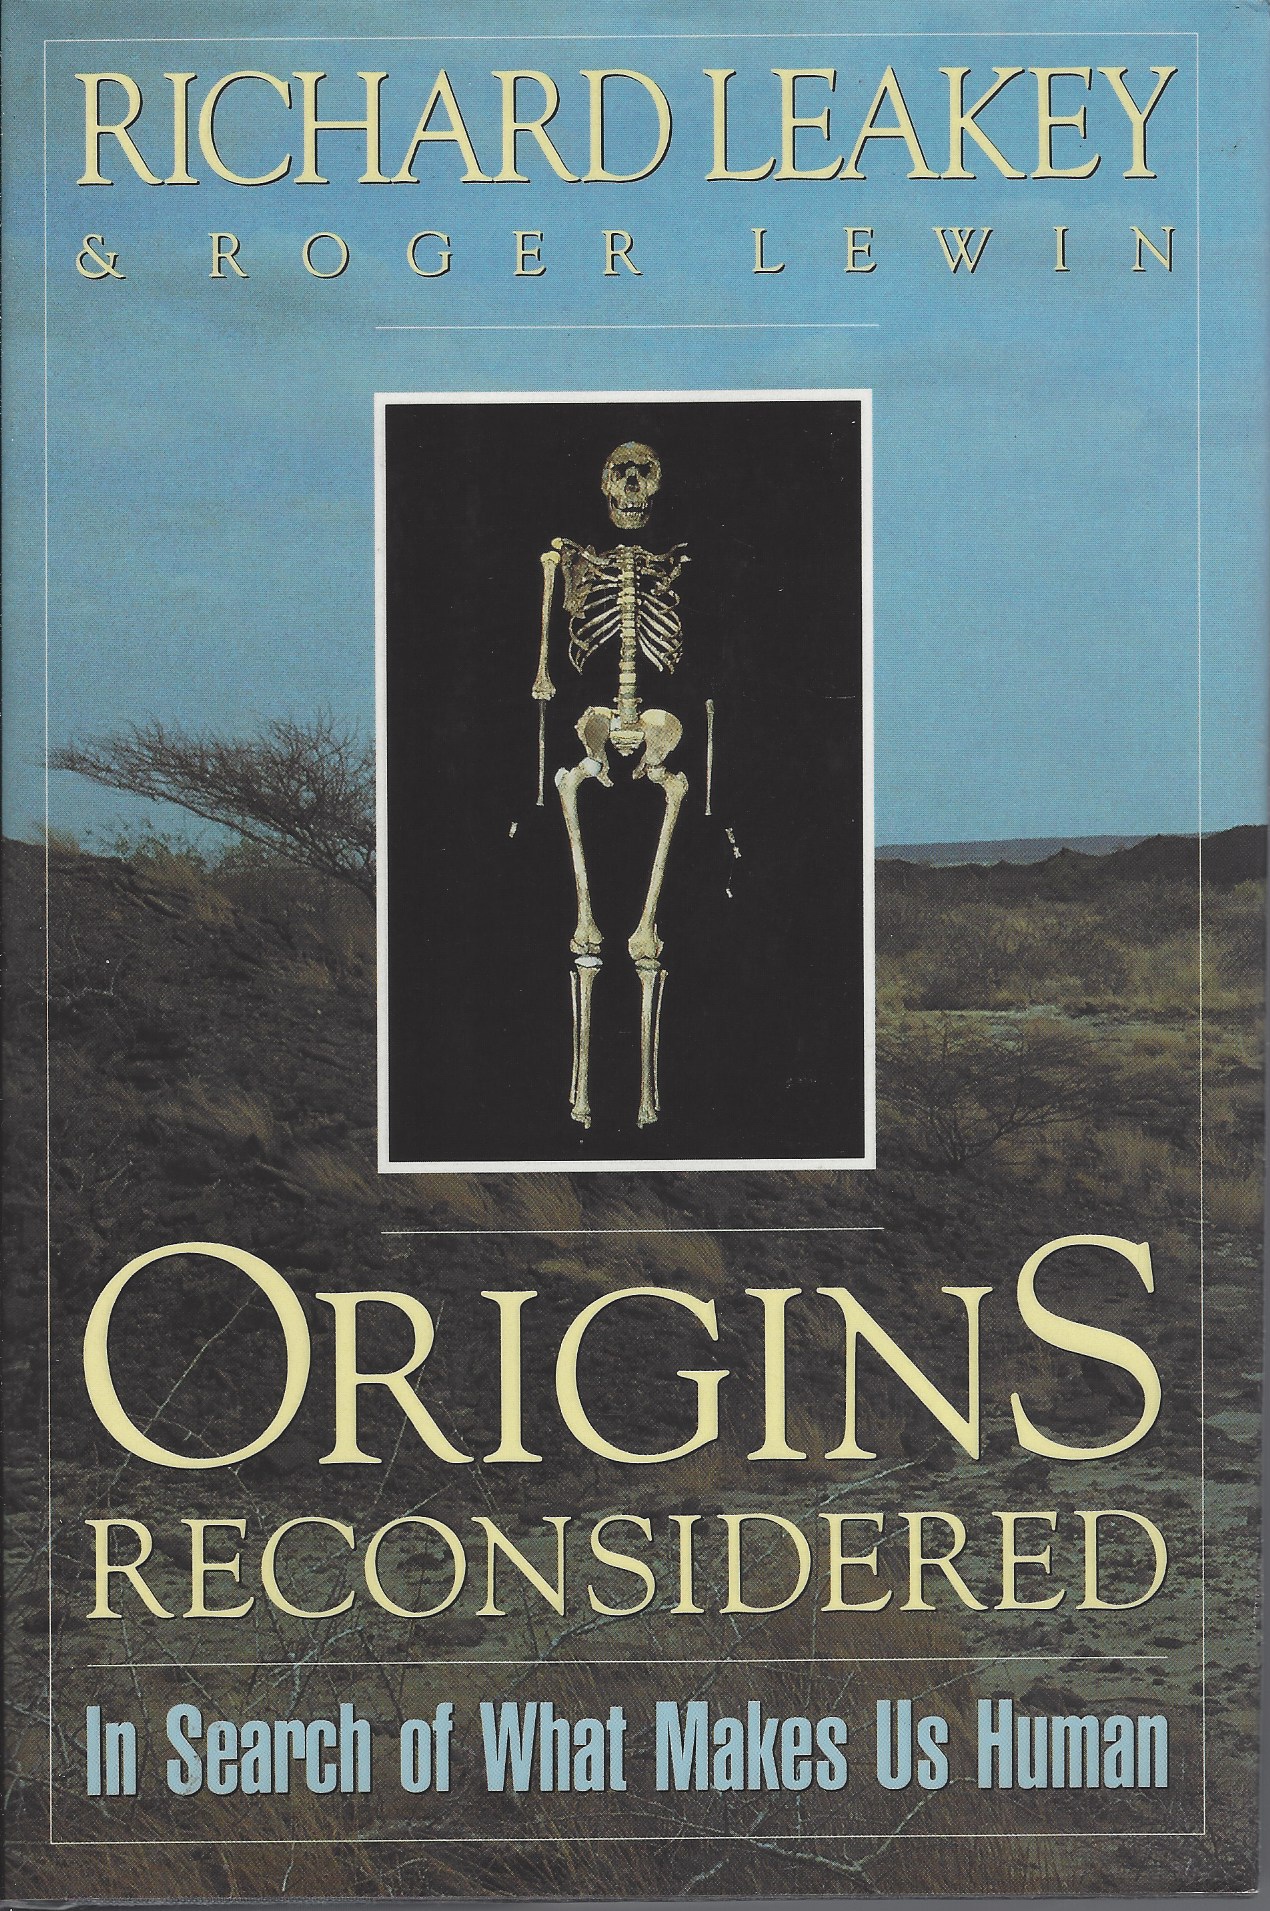 LEAKEY, RICHARD E. , ROGER LEWIN - Origins Reconsidered, in Search of What Makes Us Human